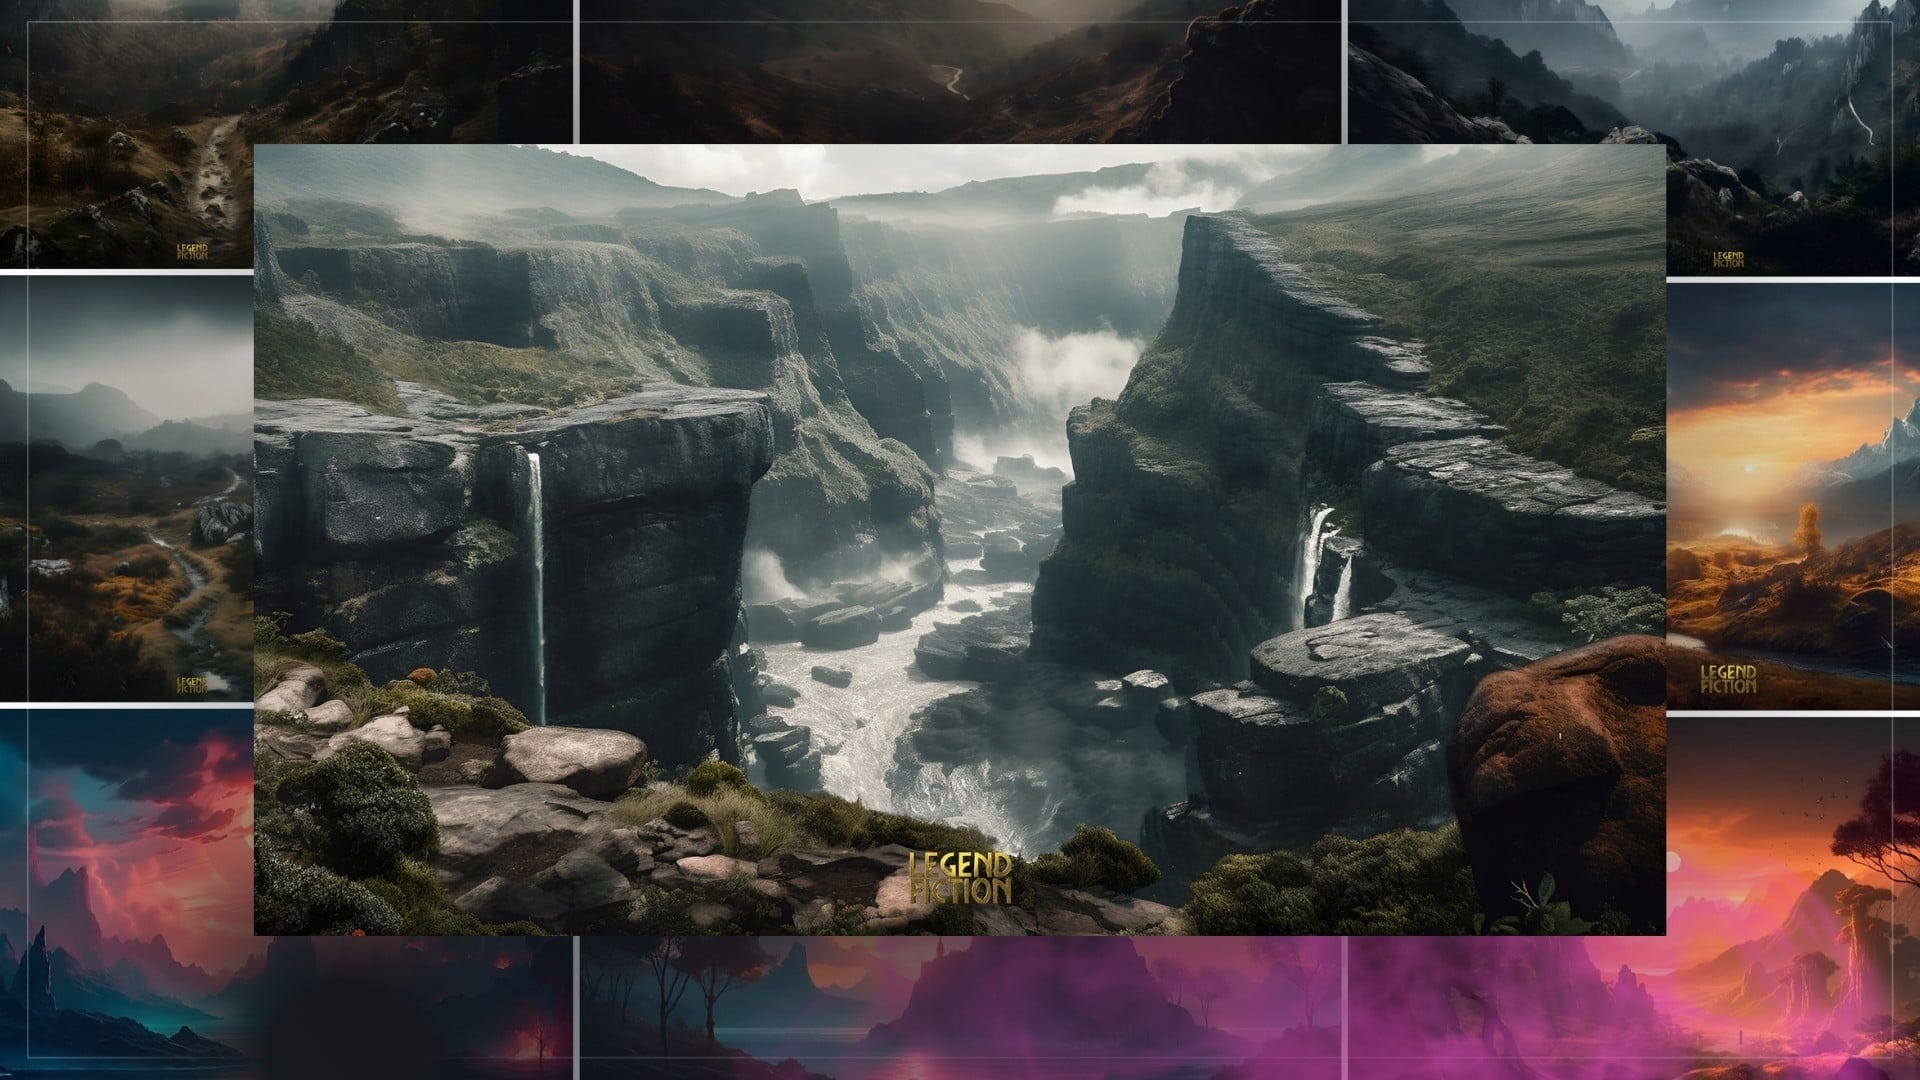 The Perilous Realm Landscapes – Free wallpapers for your screens, stories, & inspiration!